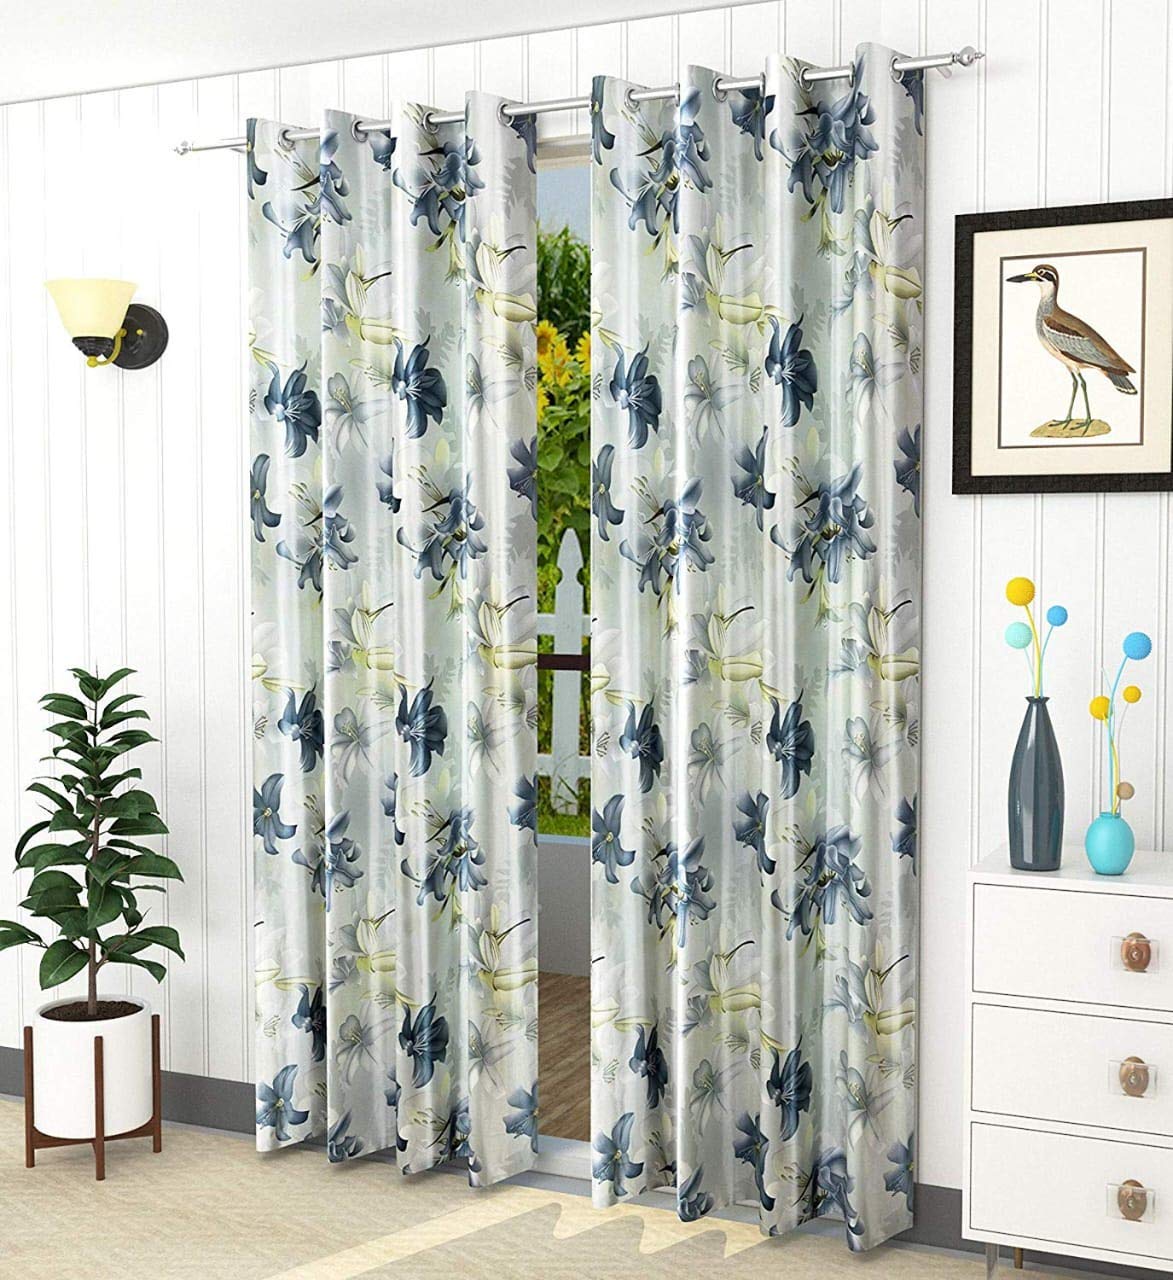 How To Measure For Your Curtains?